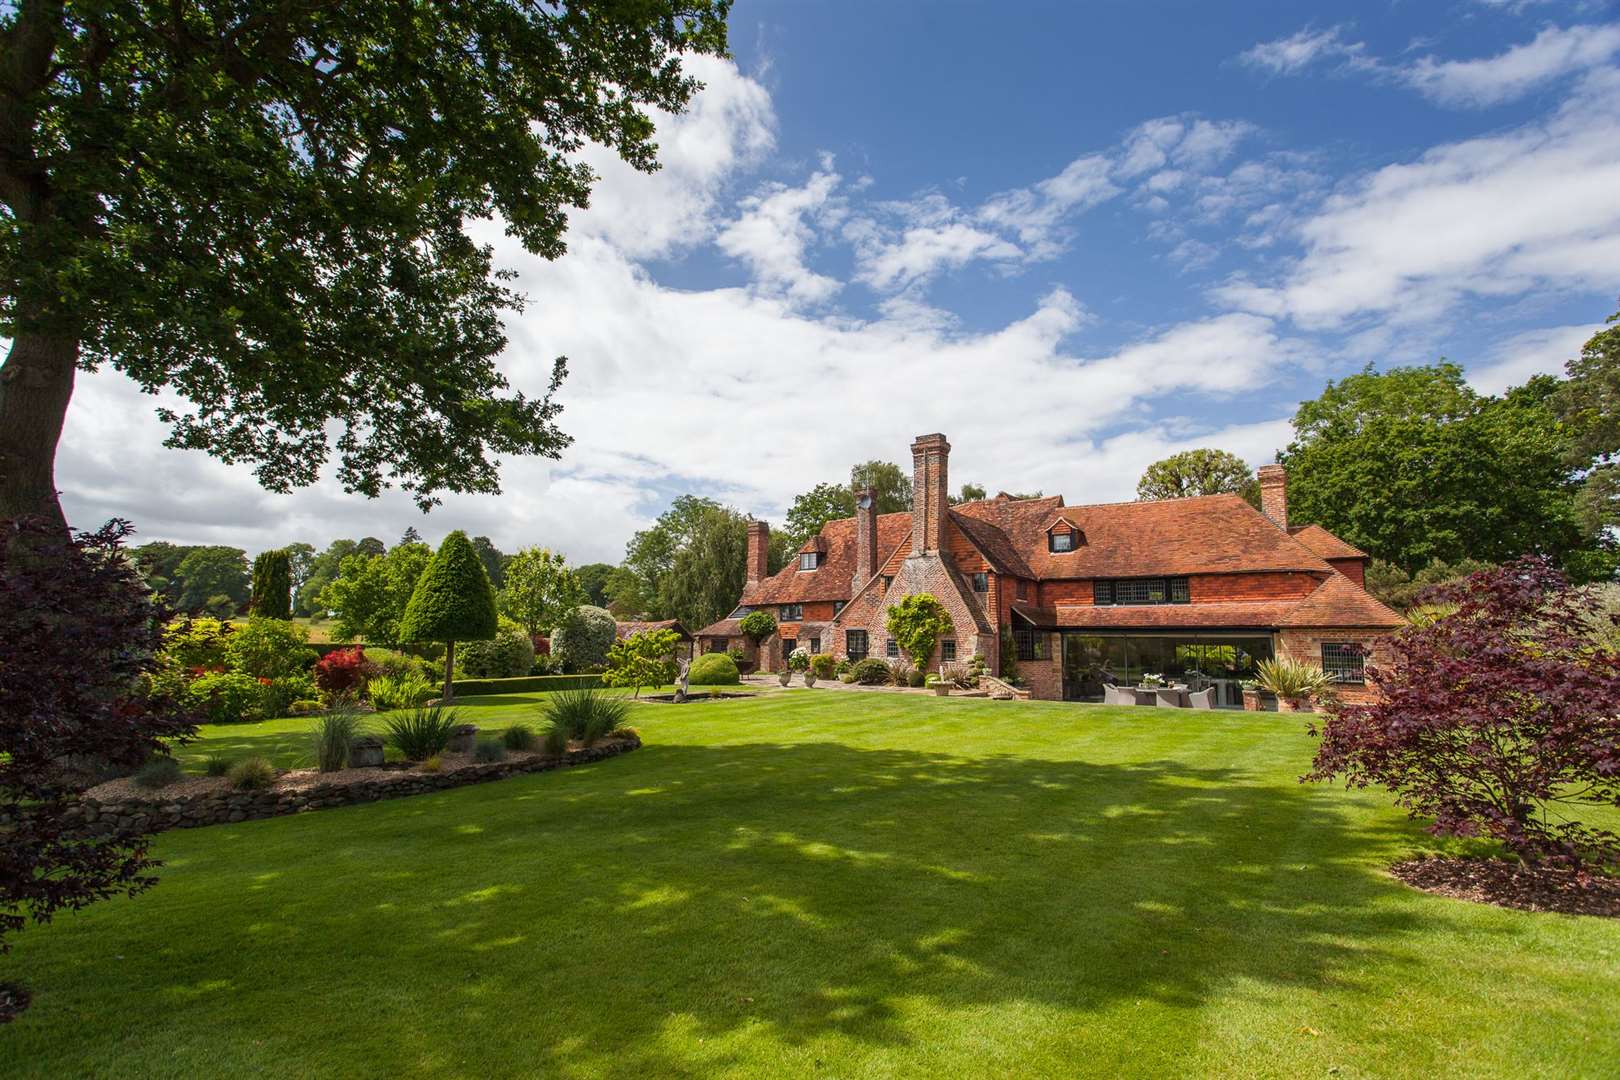 This Grade II-listed country estate in Edenbridge is the second most viewed home on Zoopla in Kent